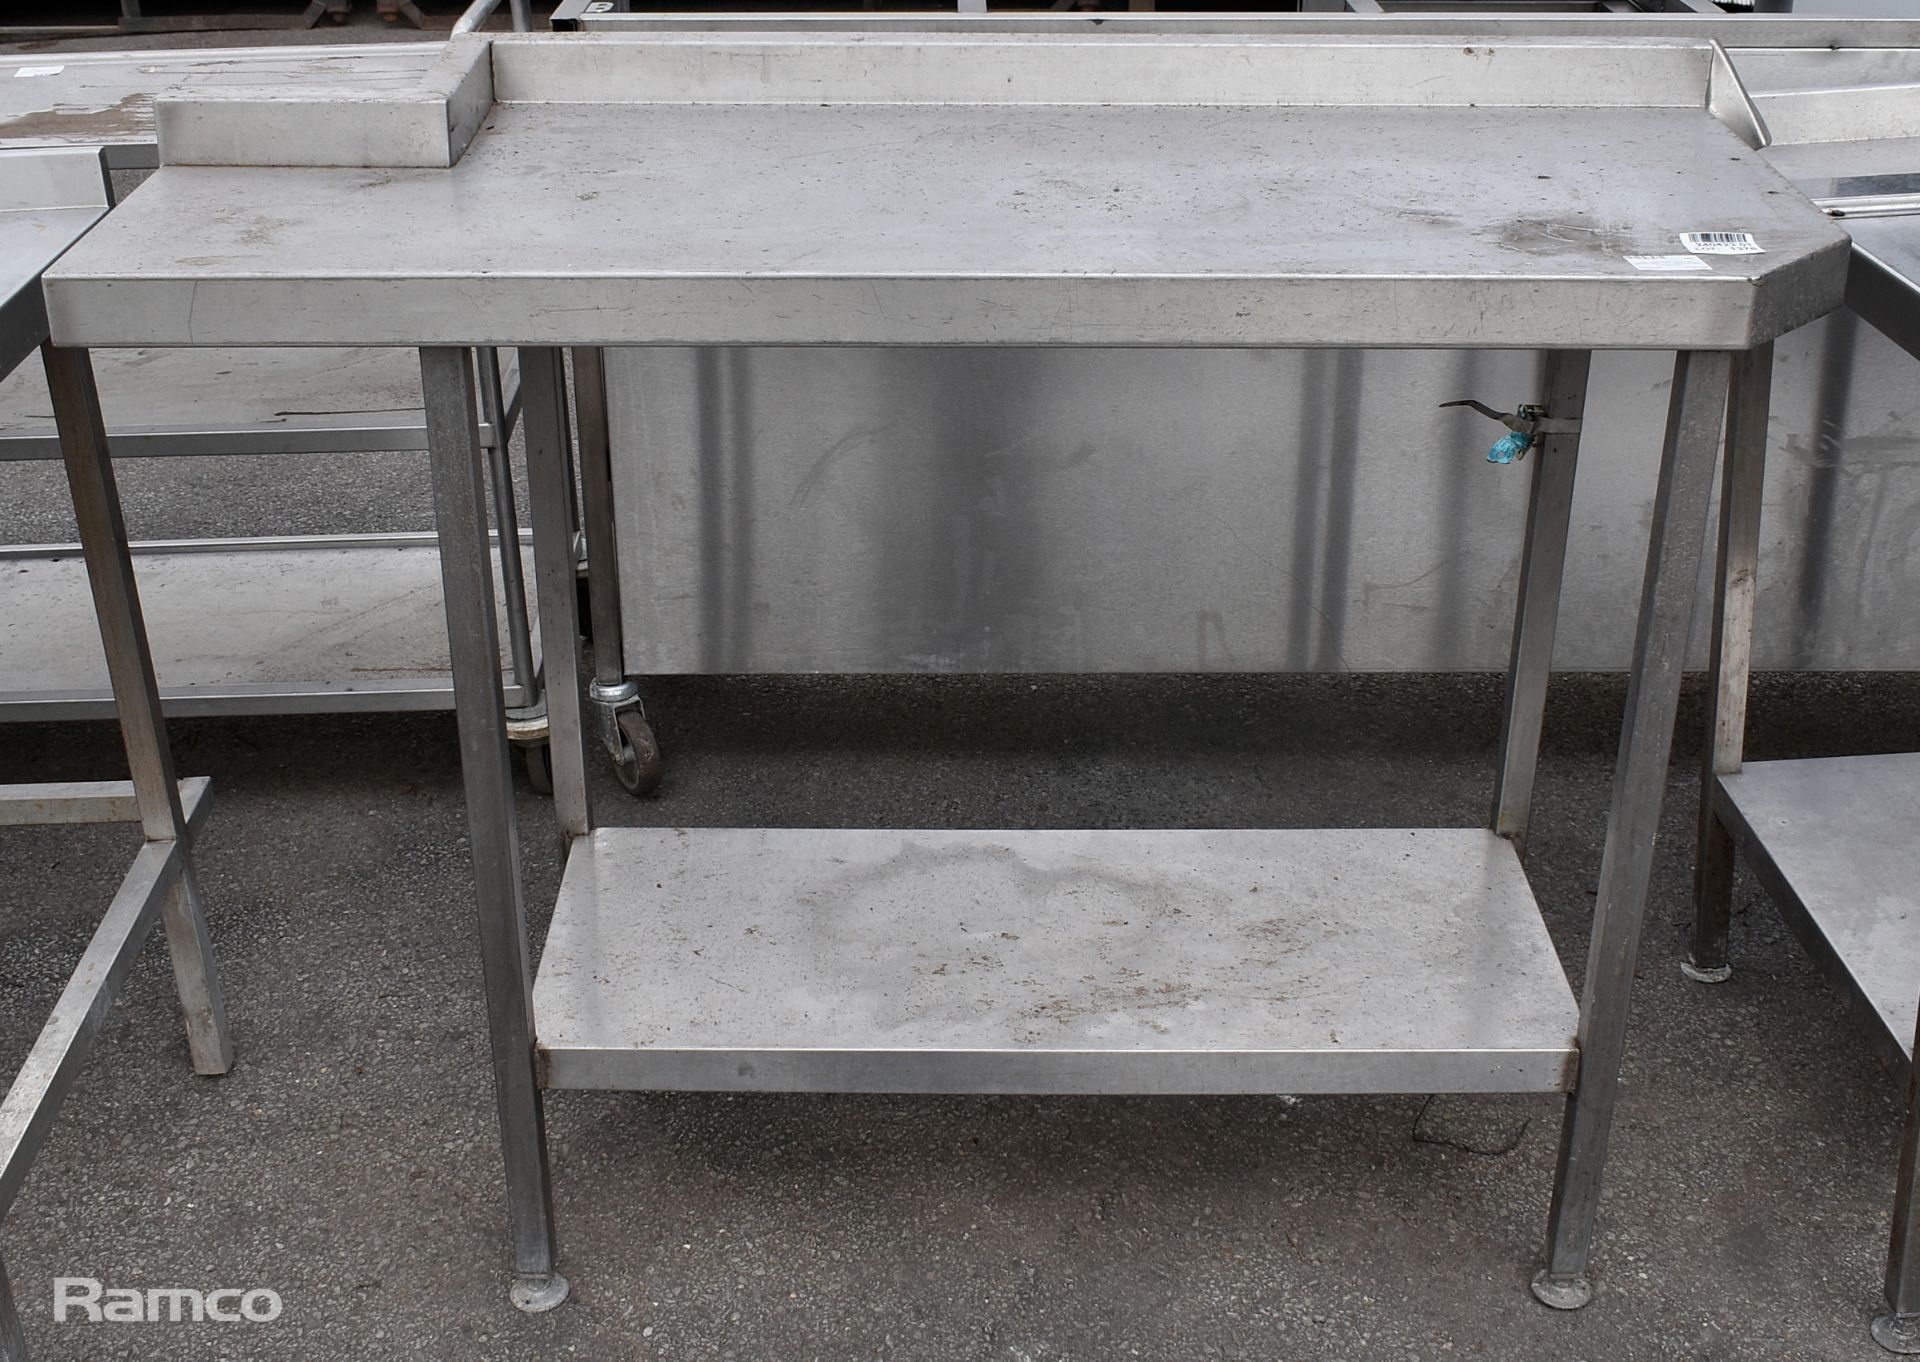 Stainless steel table with splashback - W 1250 x D 500 x H 900mm